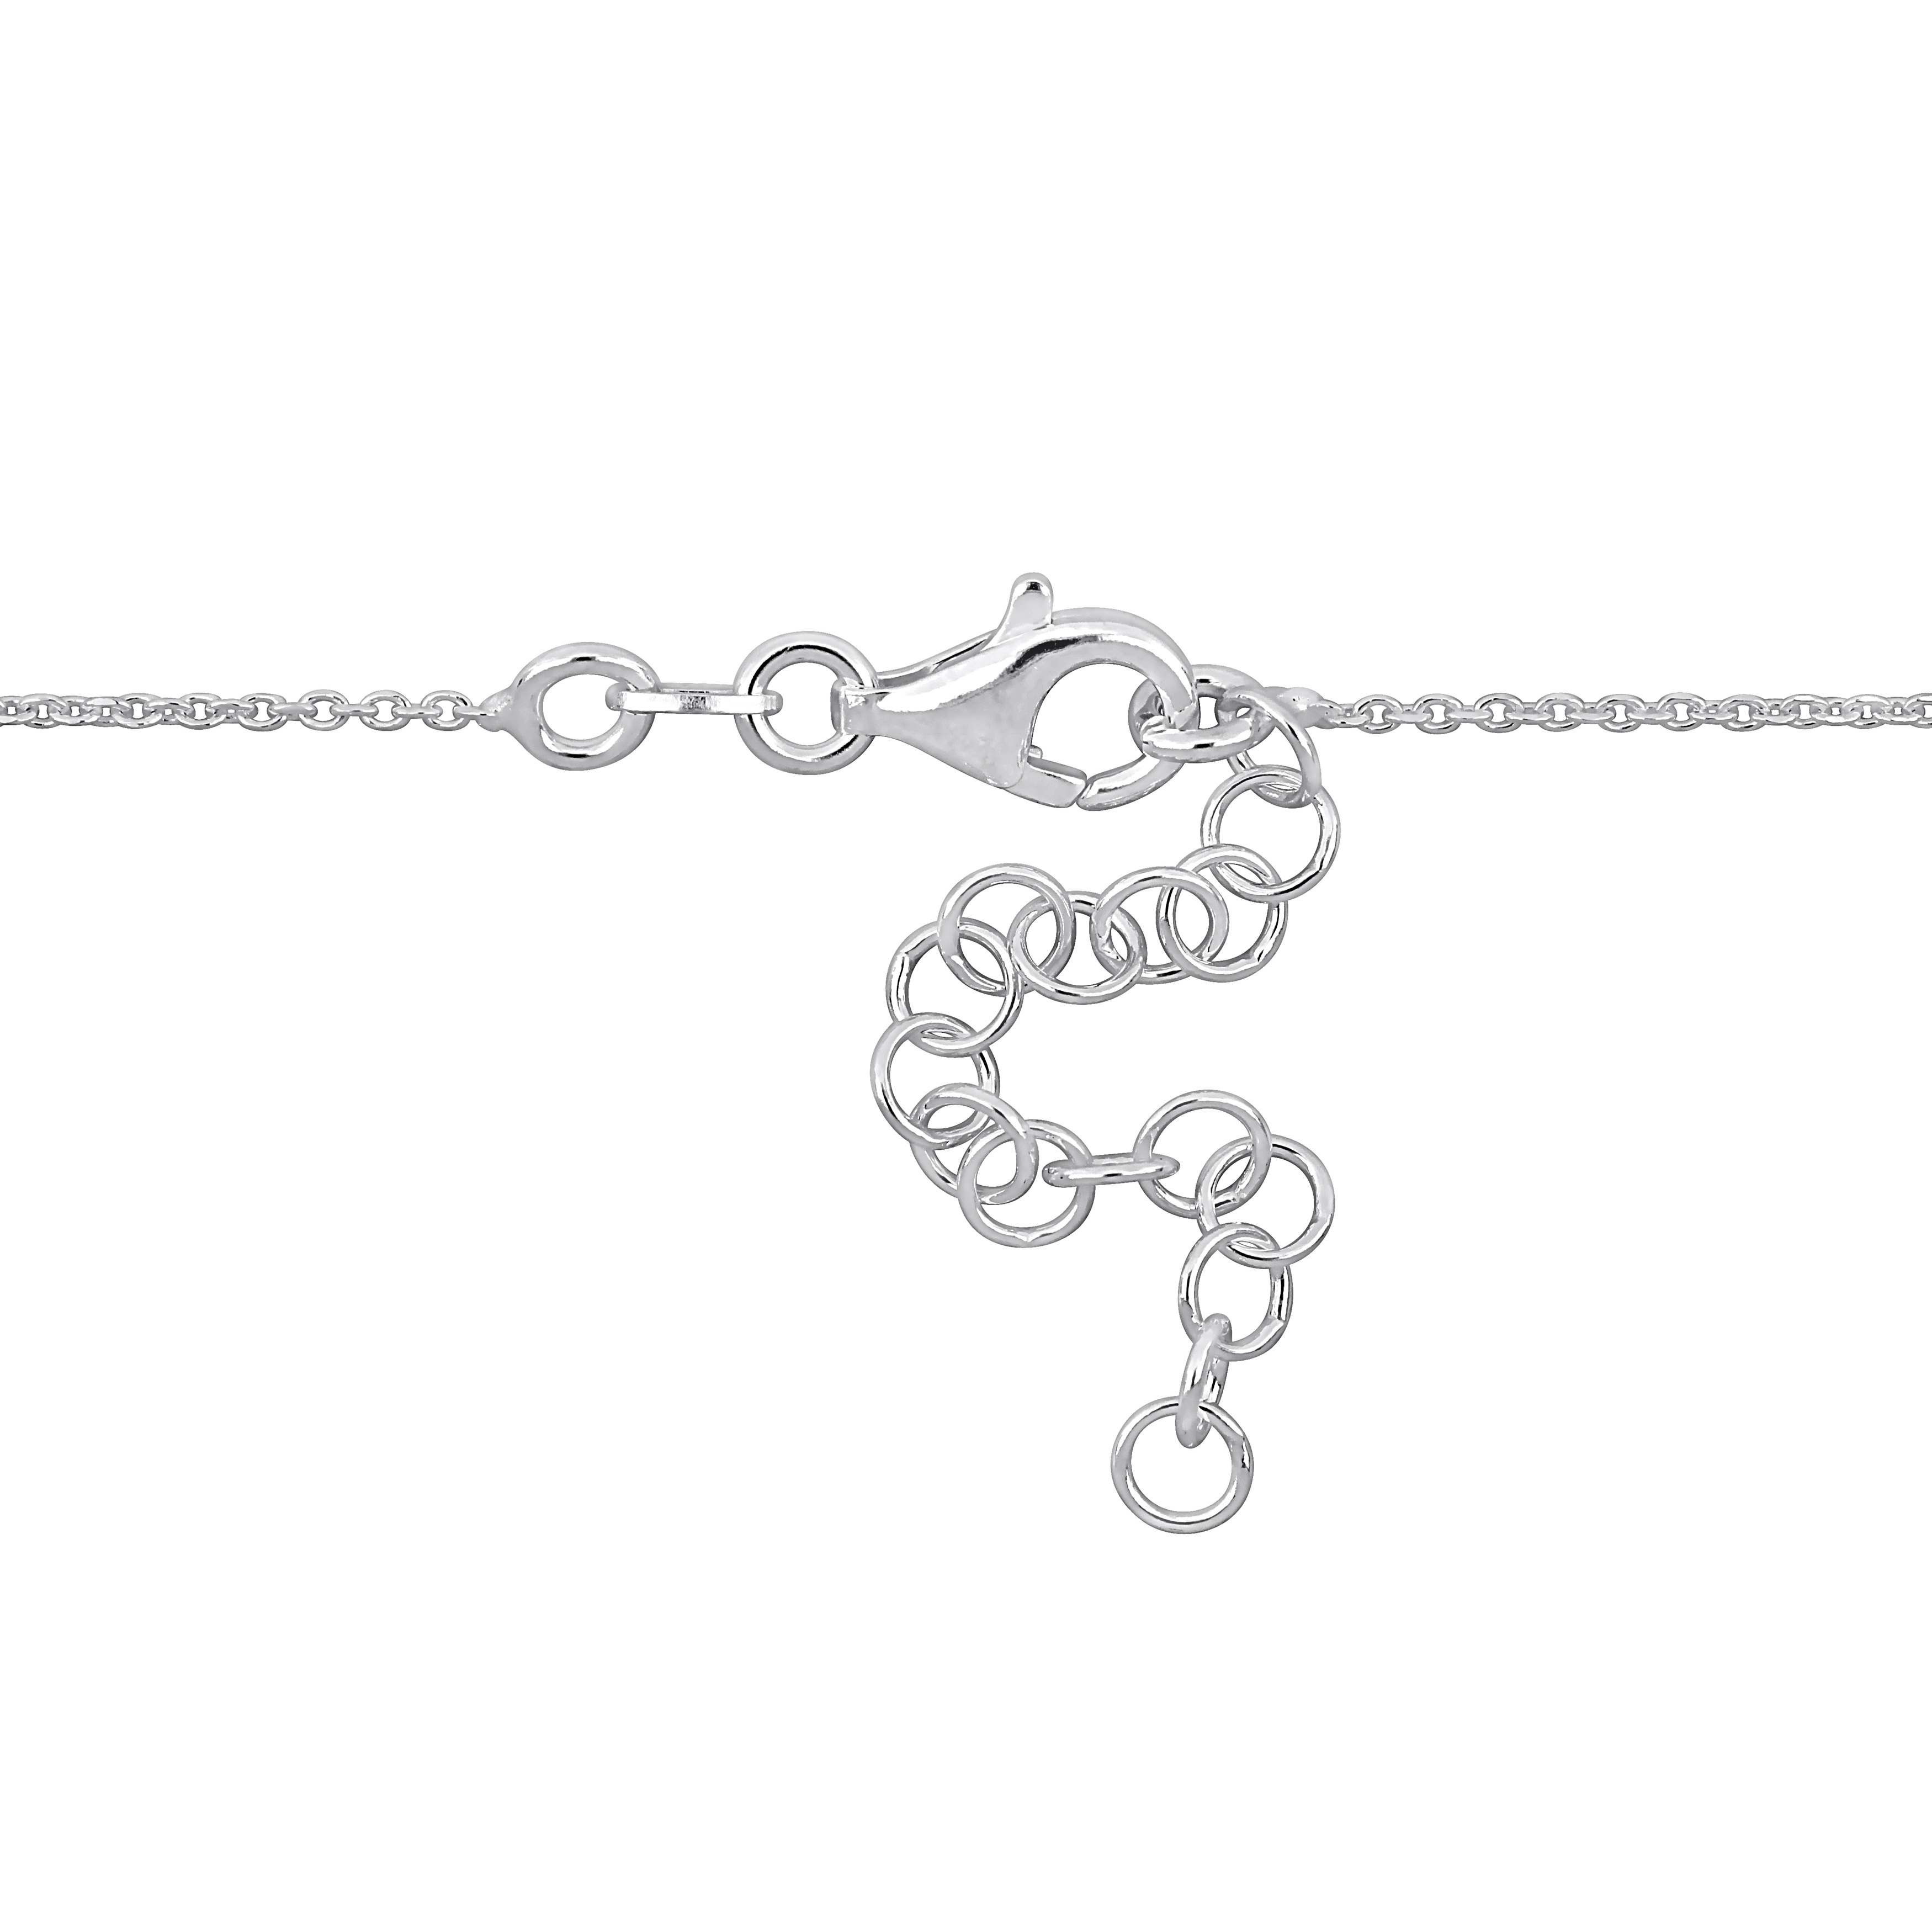 Yellow Heart Charm Bracelet on Cable Chain in Two-Tone Sterling Silver - 7+1 in.